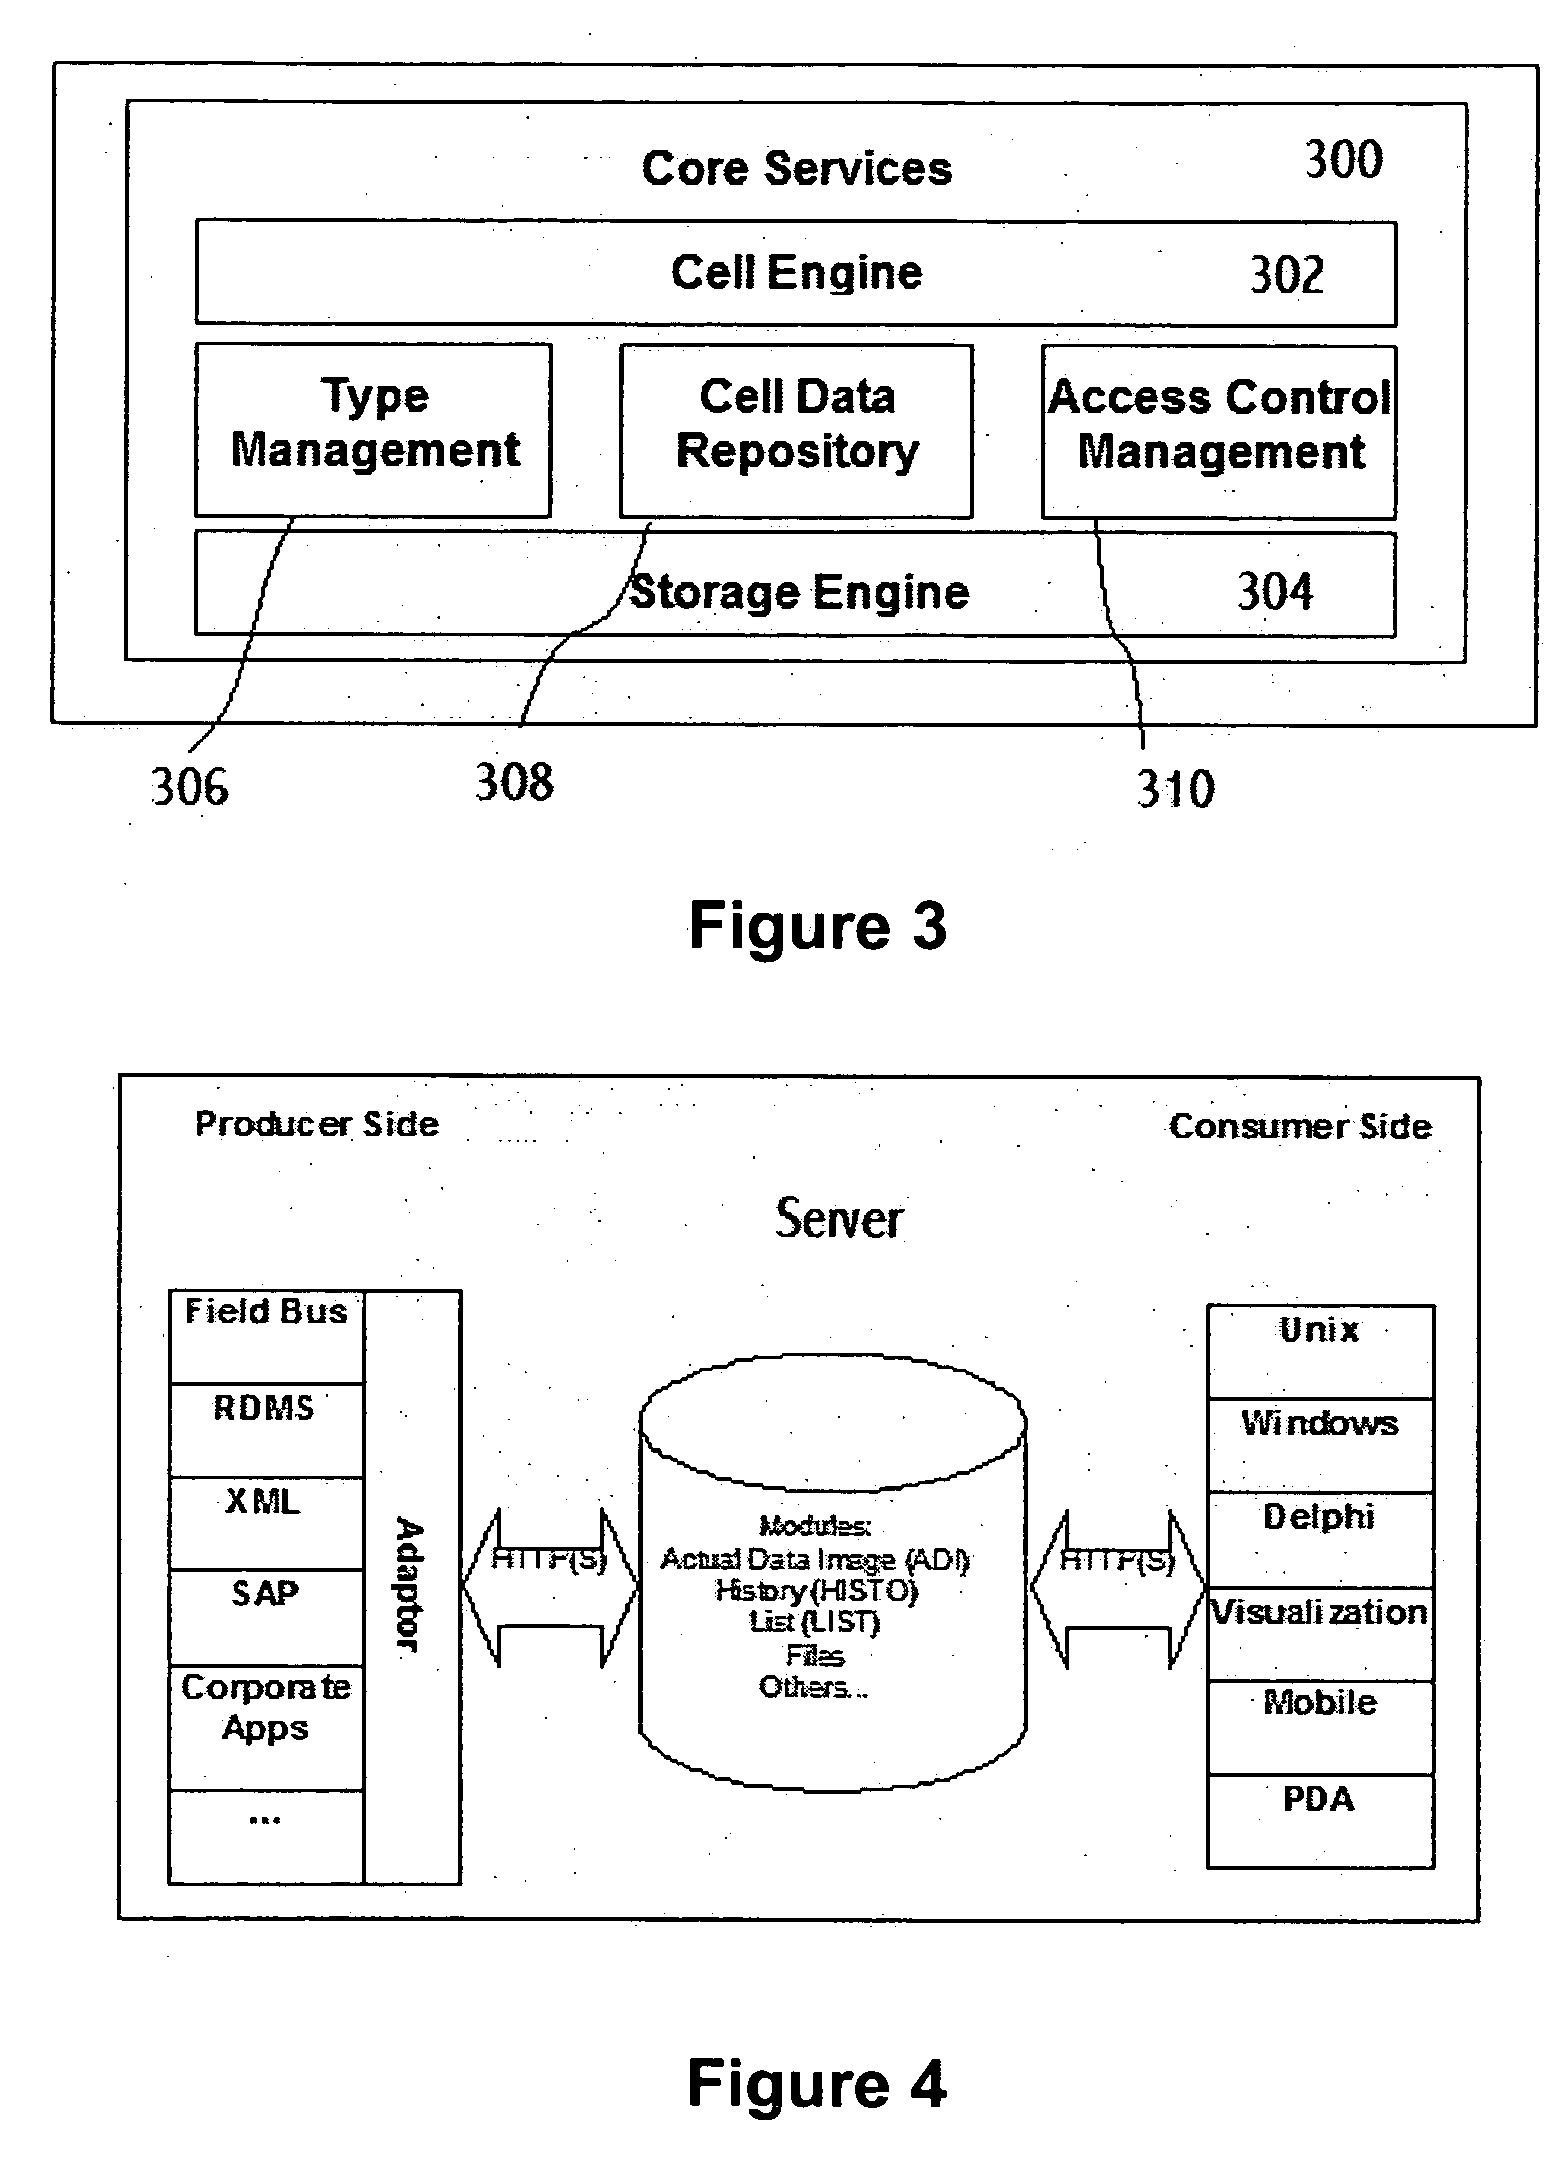 Subscription service for access to distributed cell-oriented data systems